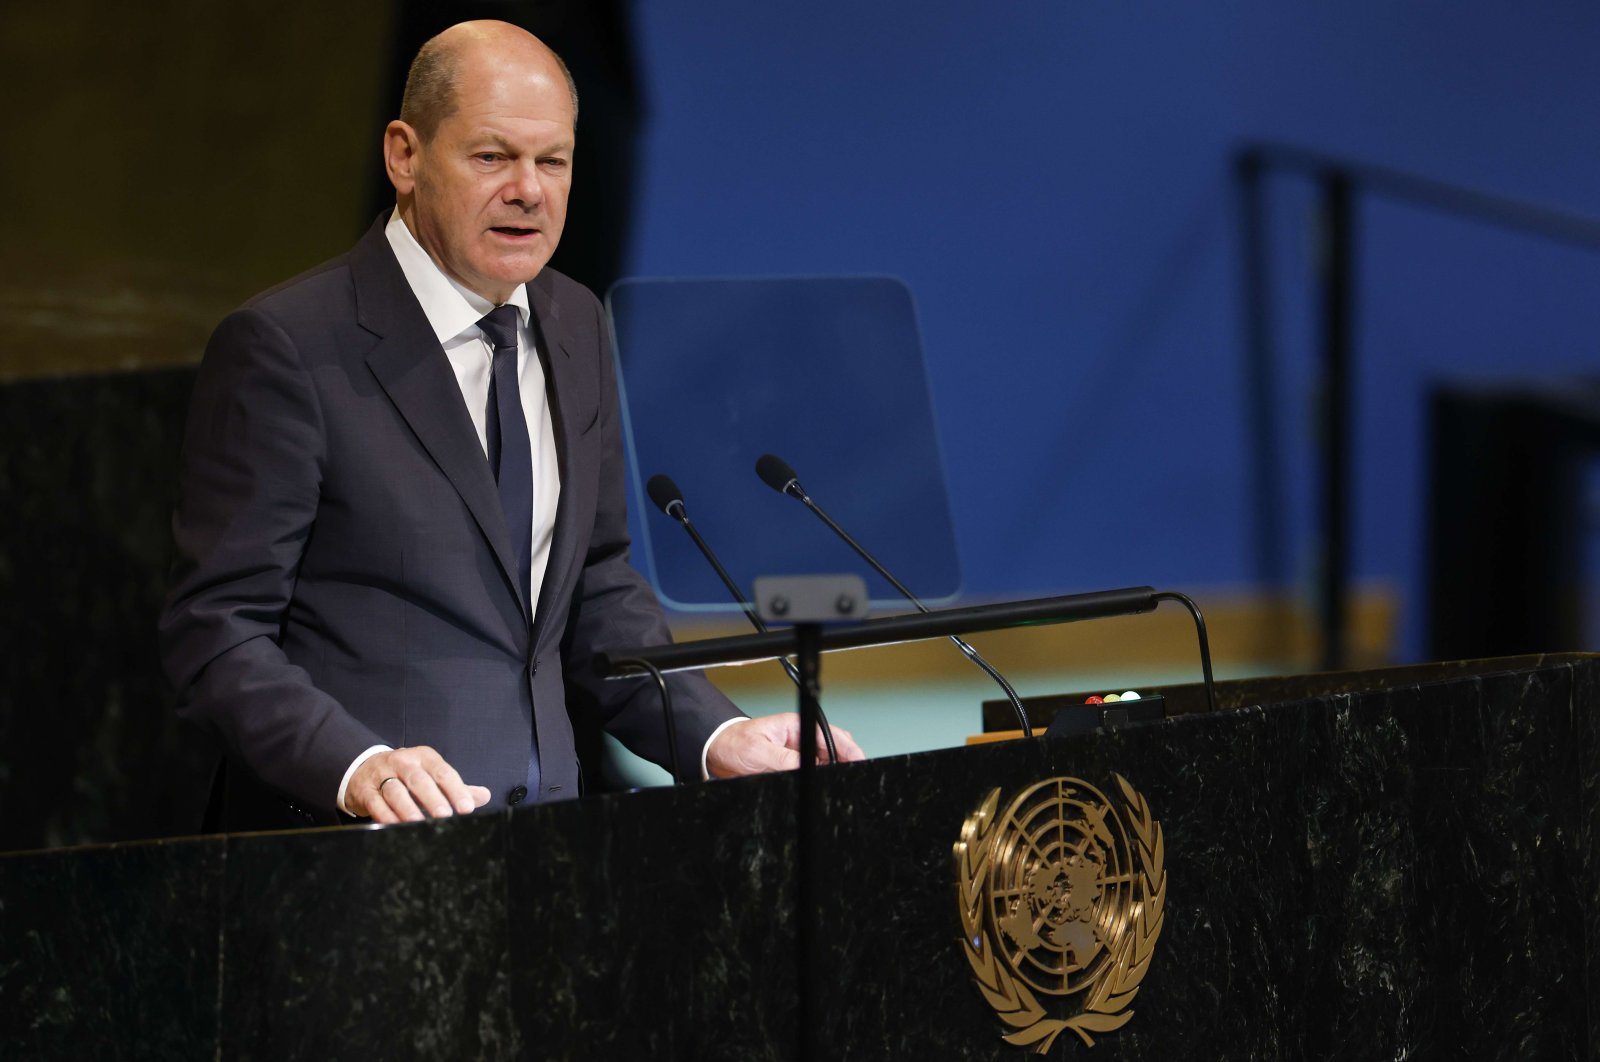 German Chancellor Olaf Scholz speaks during the 77th session of the United Nations General Assembly (UNGA) at U.N. headquarters, New York City, U.S., Sept. 20, 2022. (AFP Photo)